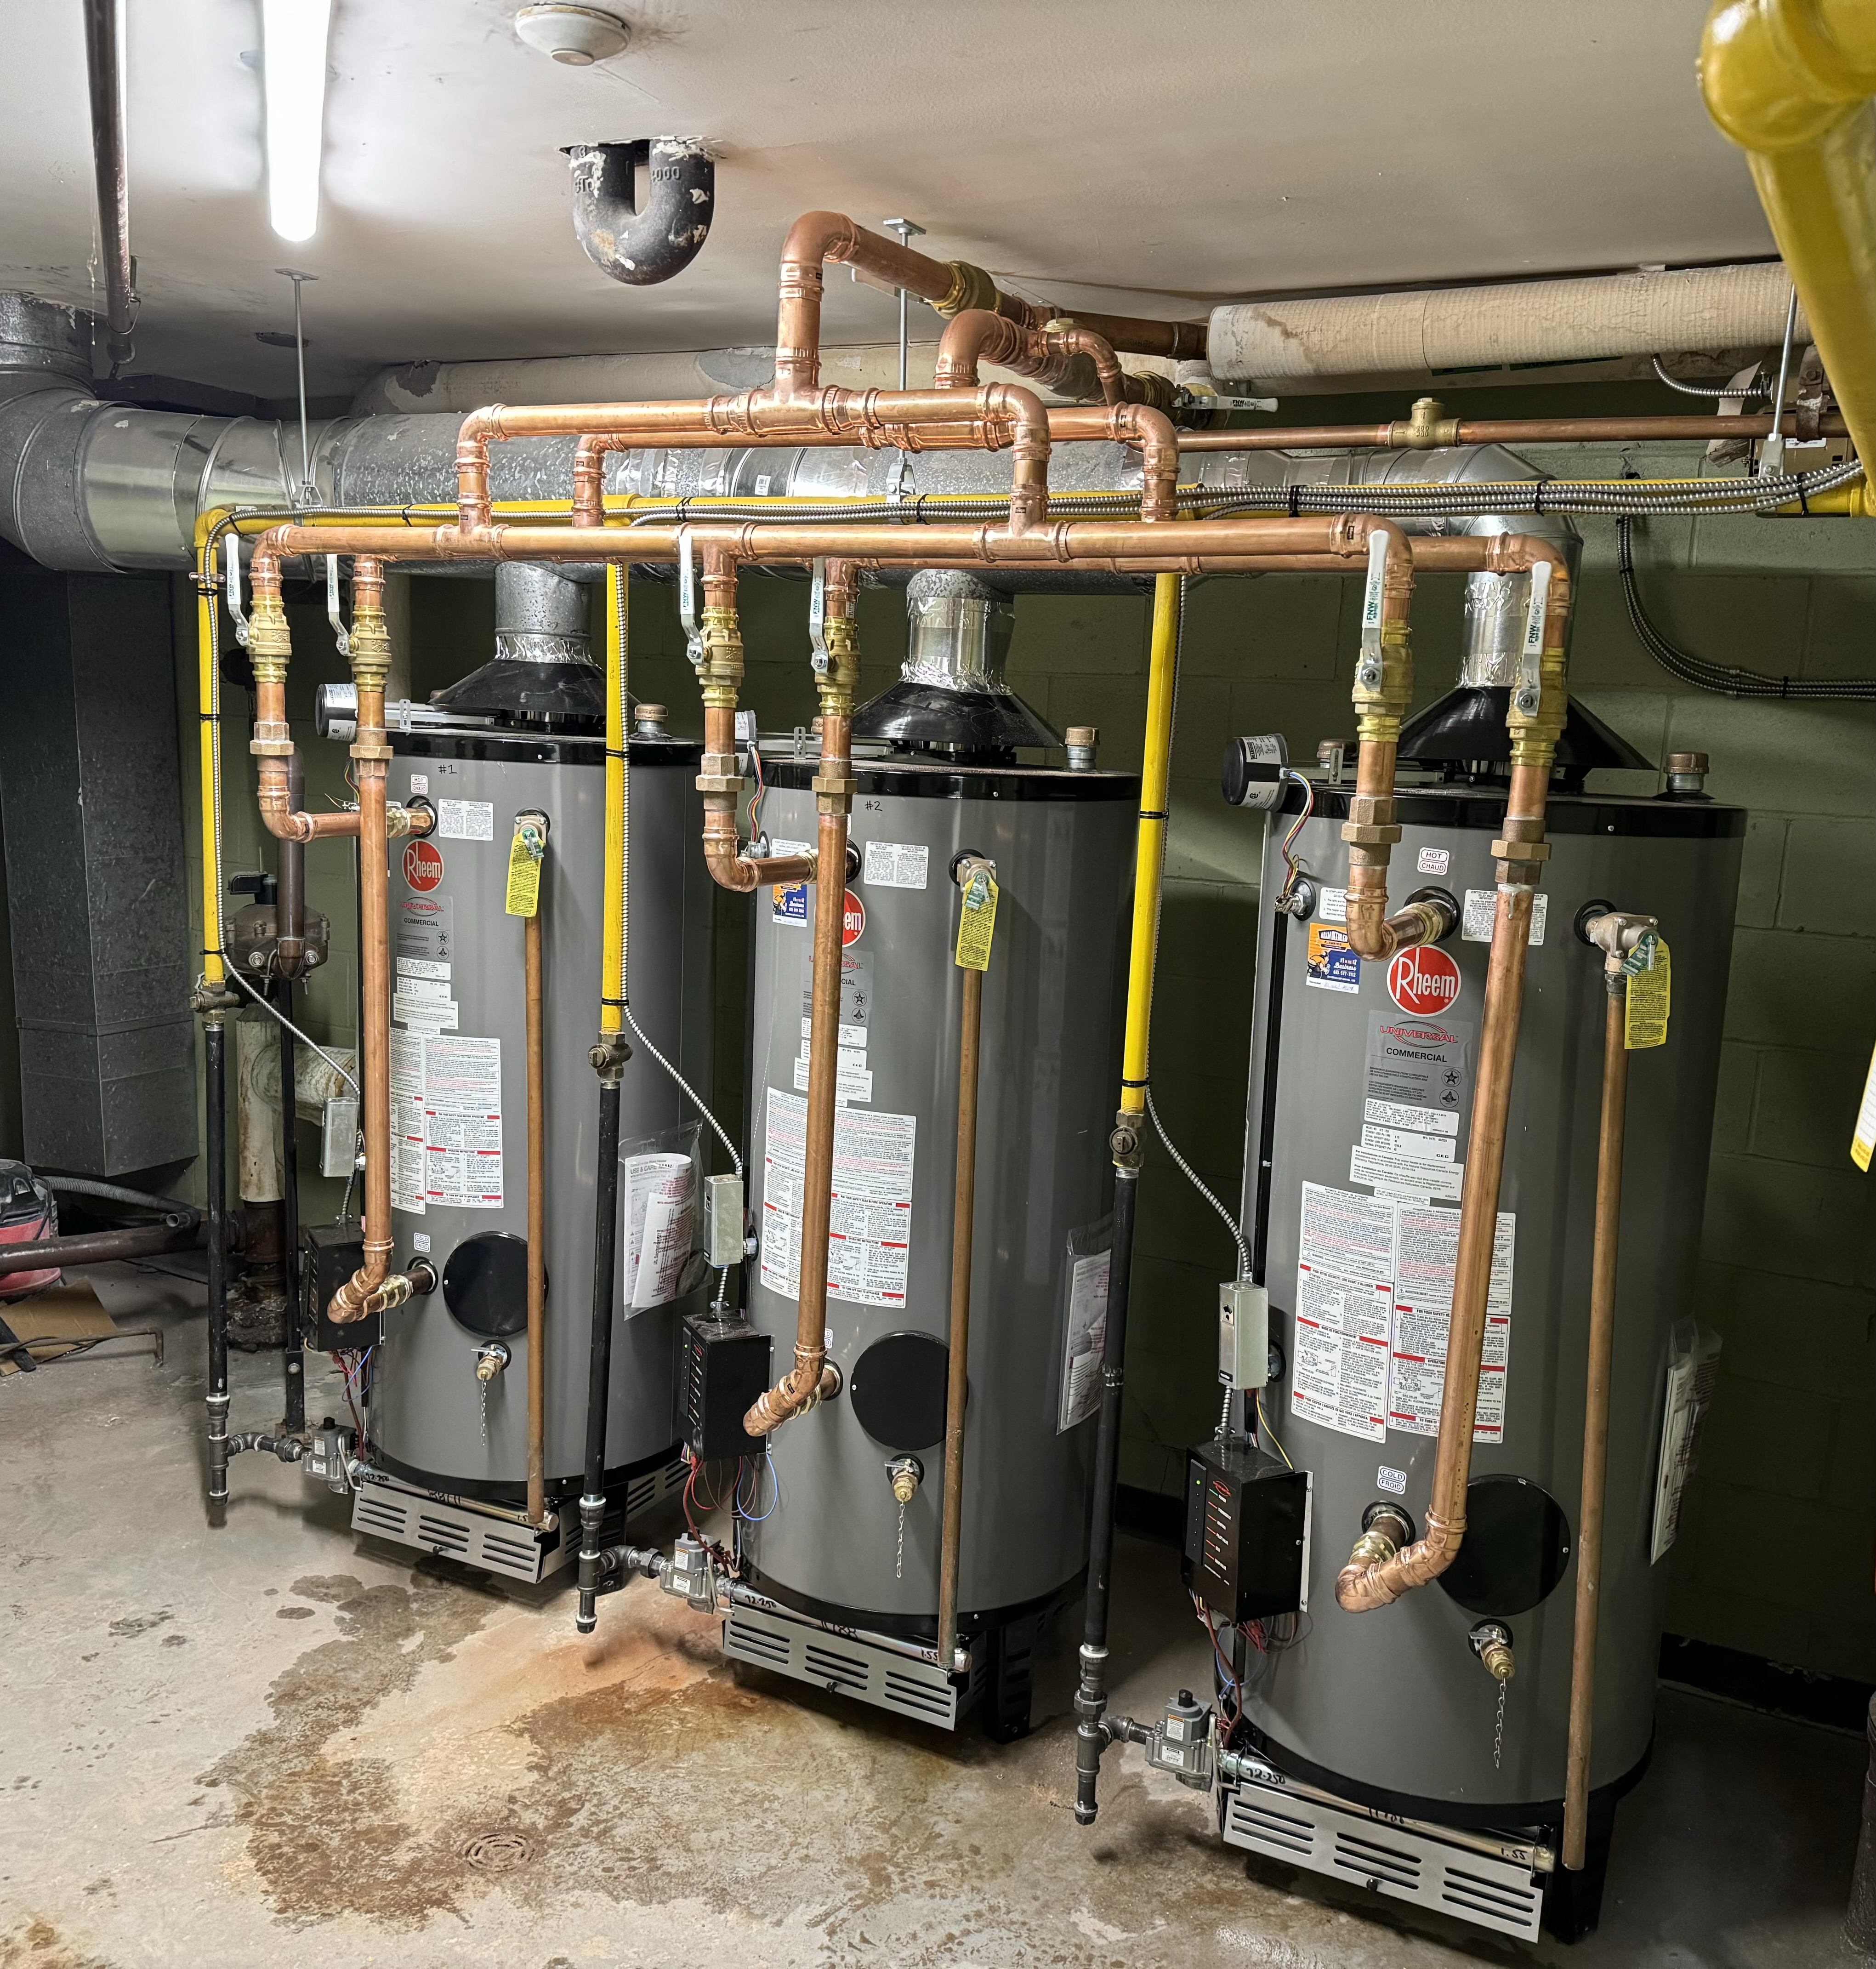 Residential Complex - Hot Water Tank Replacements